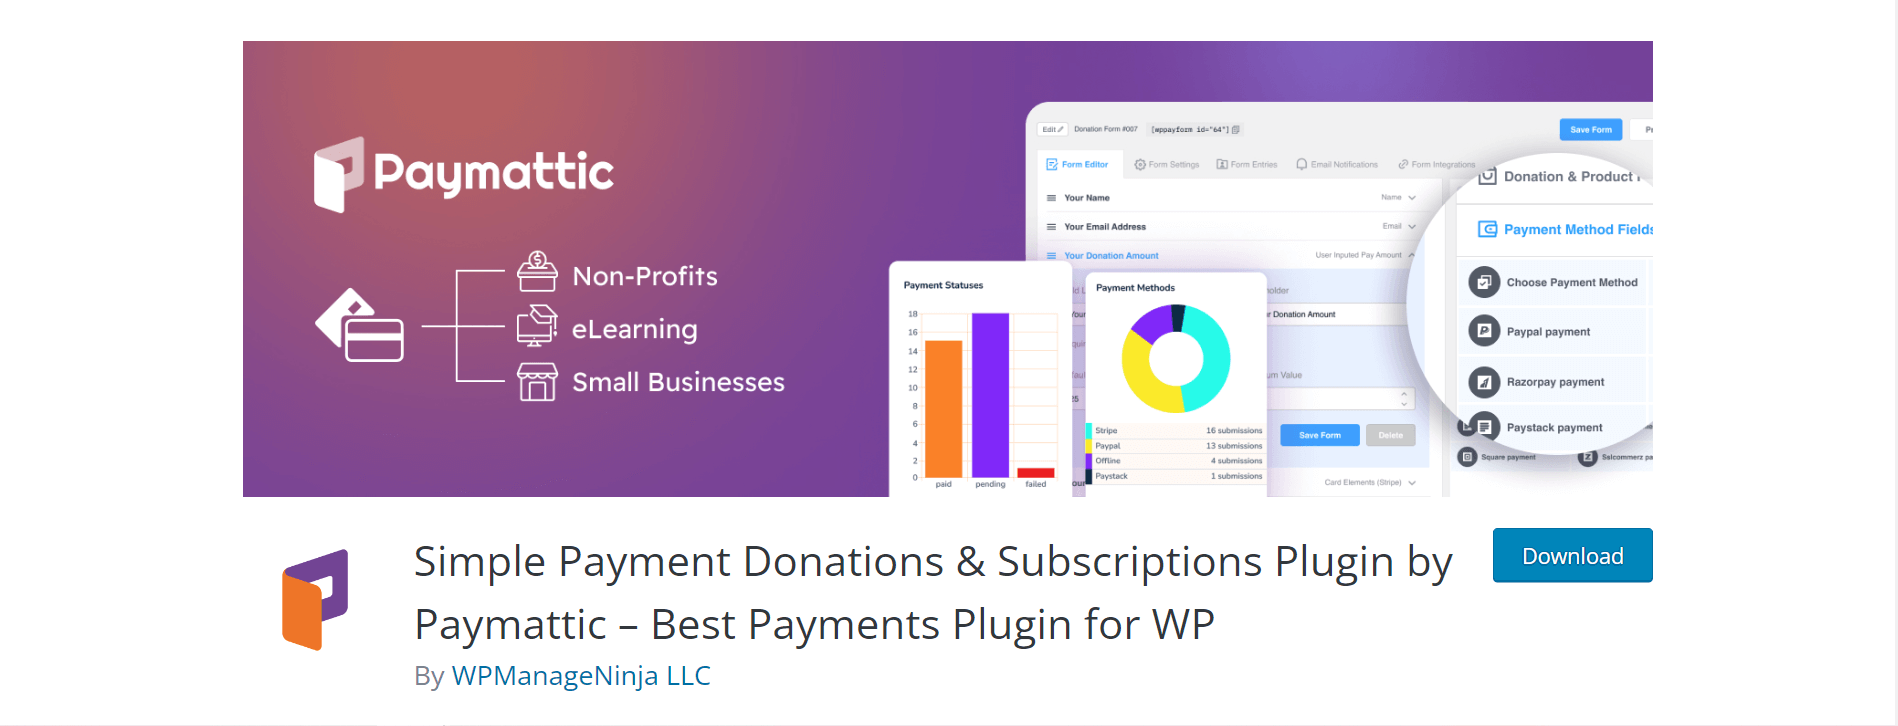 WP PayForm by Paymattic- best payment plugins for WordPress 